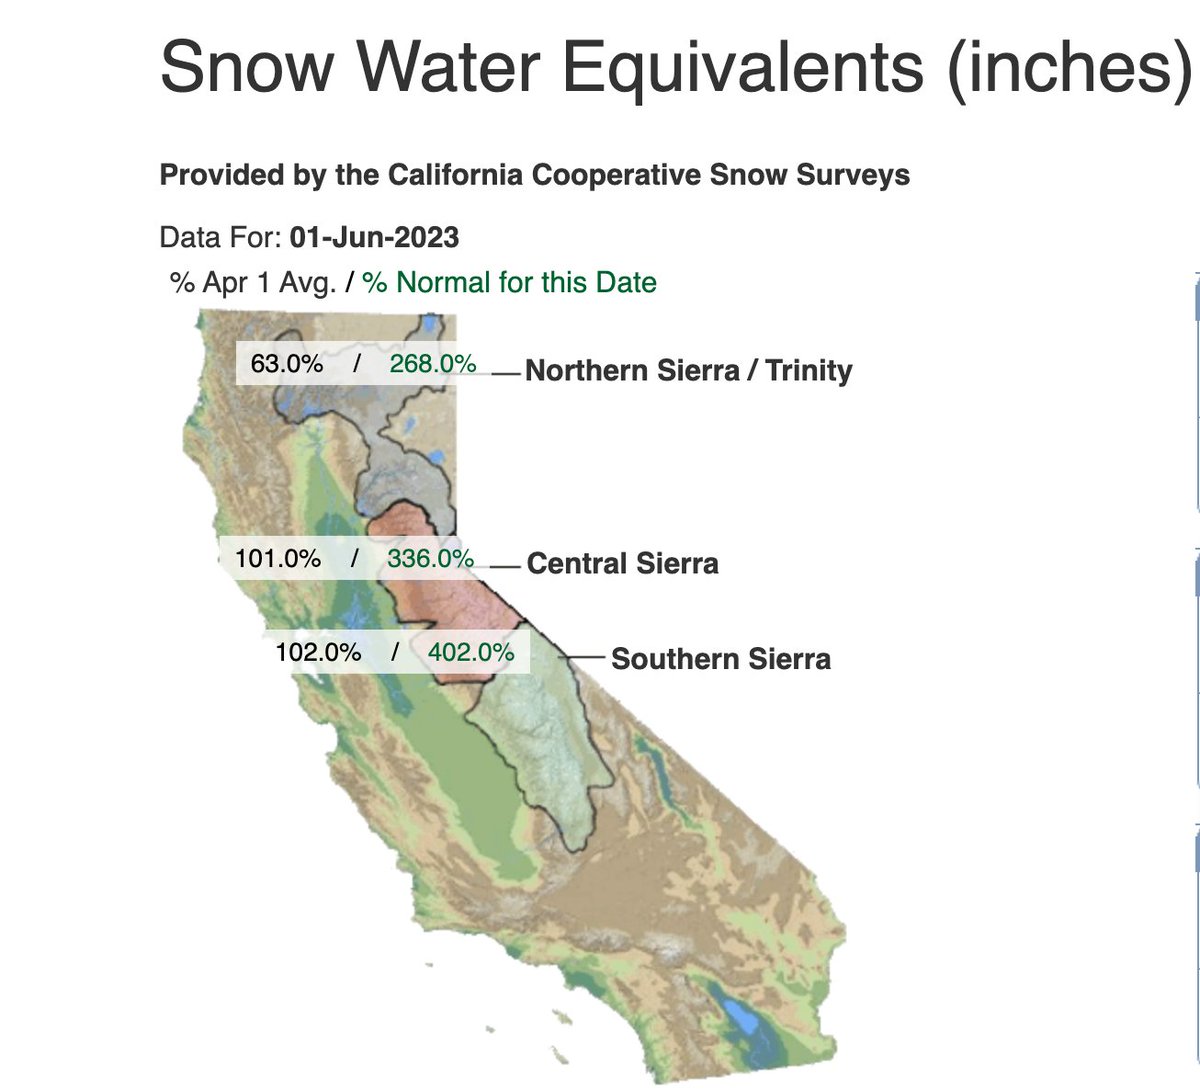 Exactly two months past April 1, Southern California is at 102% snowpack for the 4/1 average. #snowpack #cawx